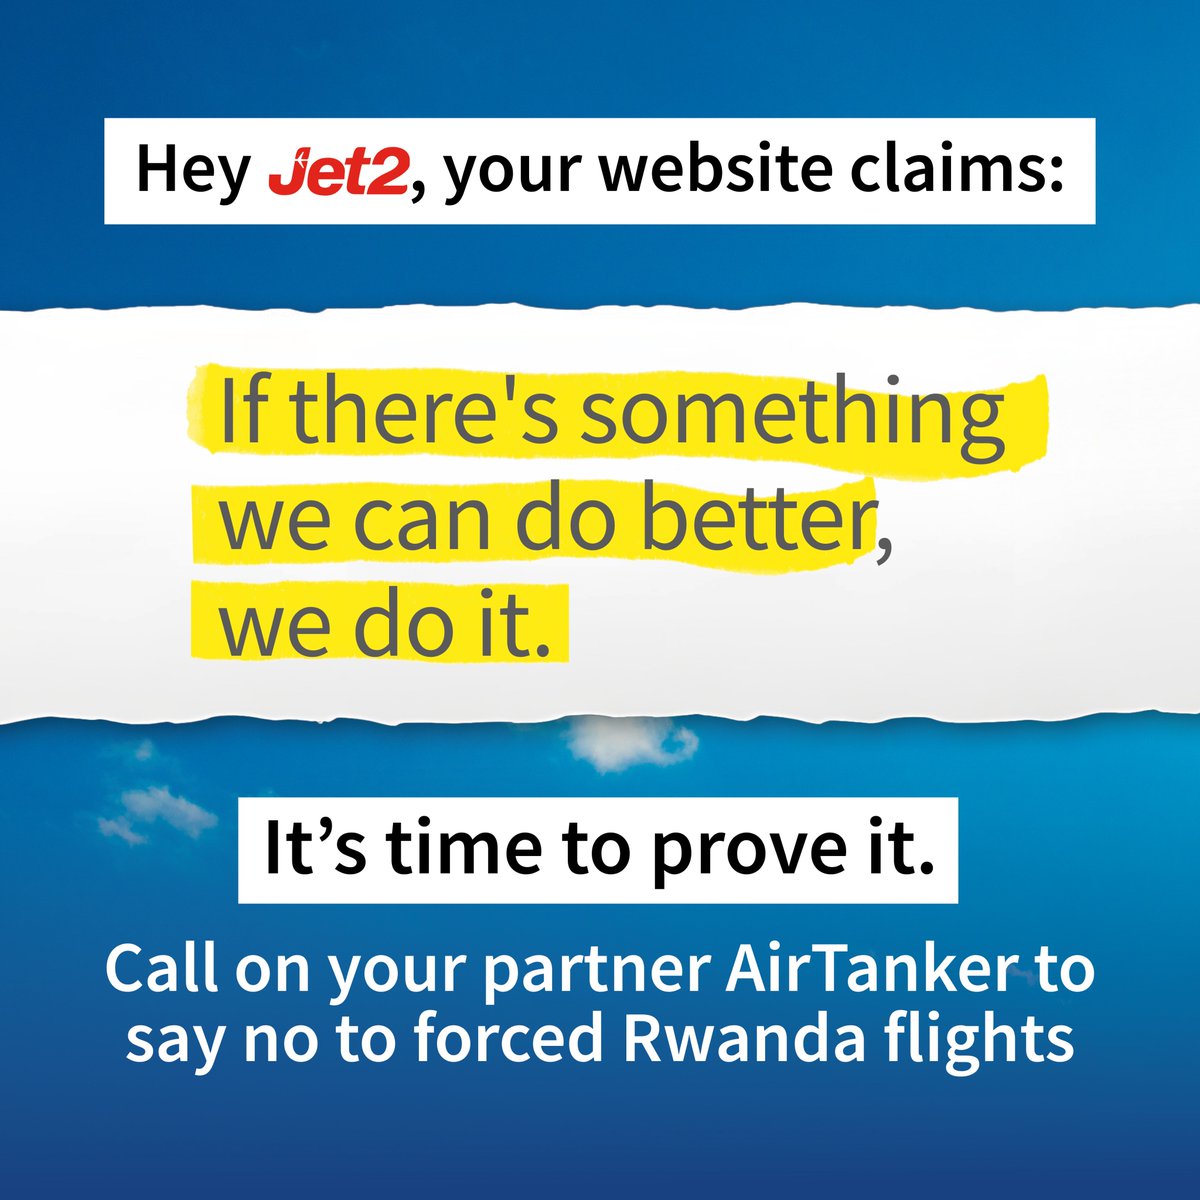 Jet2, your website states: “We always think about what we do & how it impacts our customers & colleagues... If there's something we can do better, we do it.”

It’s time to do better, @jet2tweets.

Tell your partner AirTanker to DITCH FORCED FLIGHTS TO RWANDA.